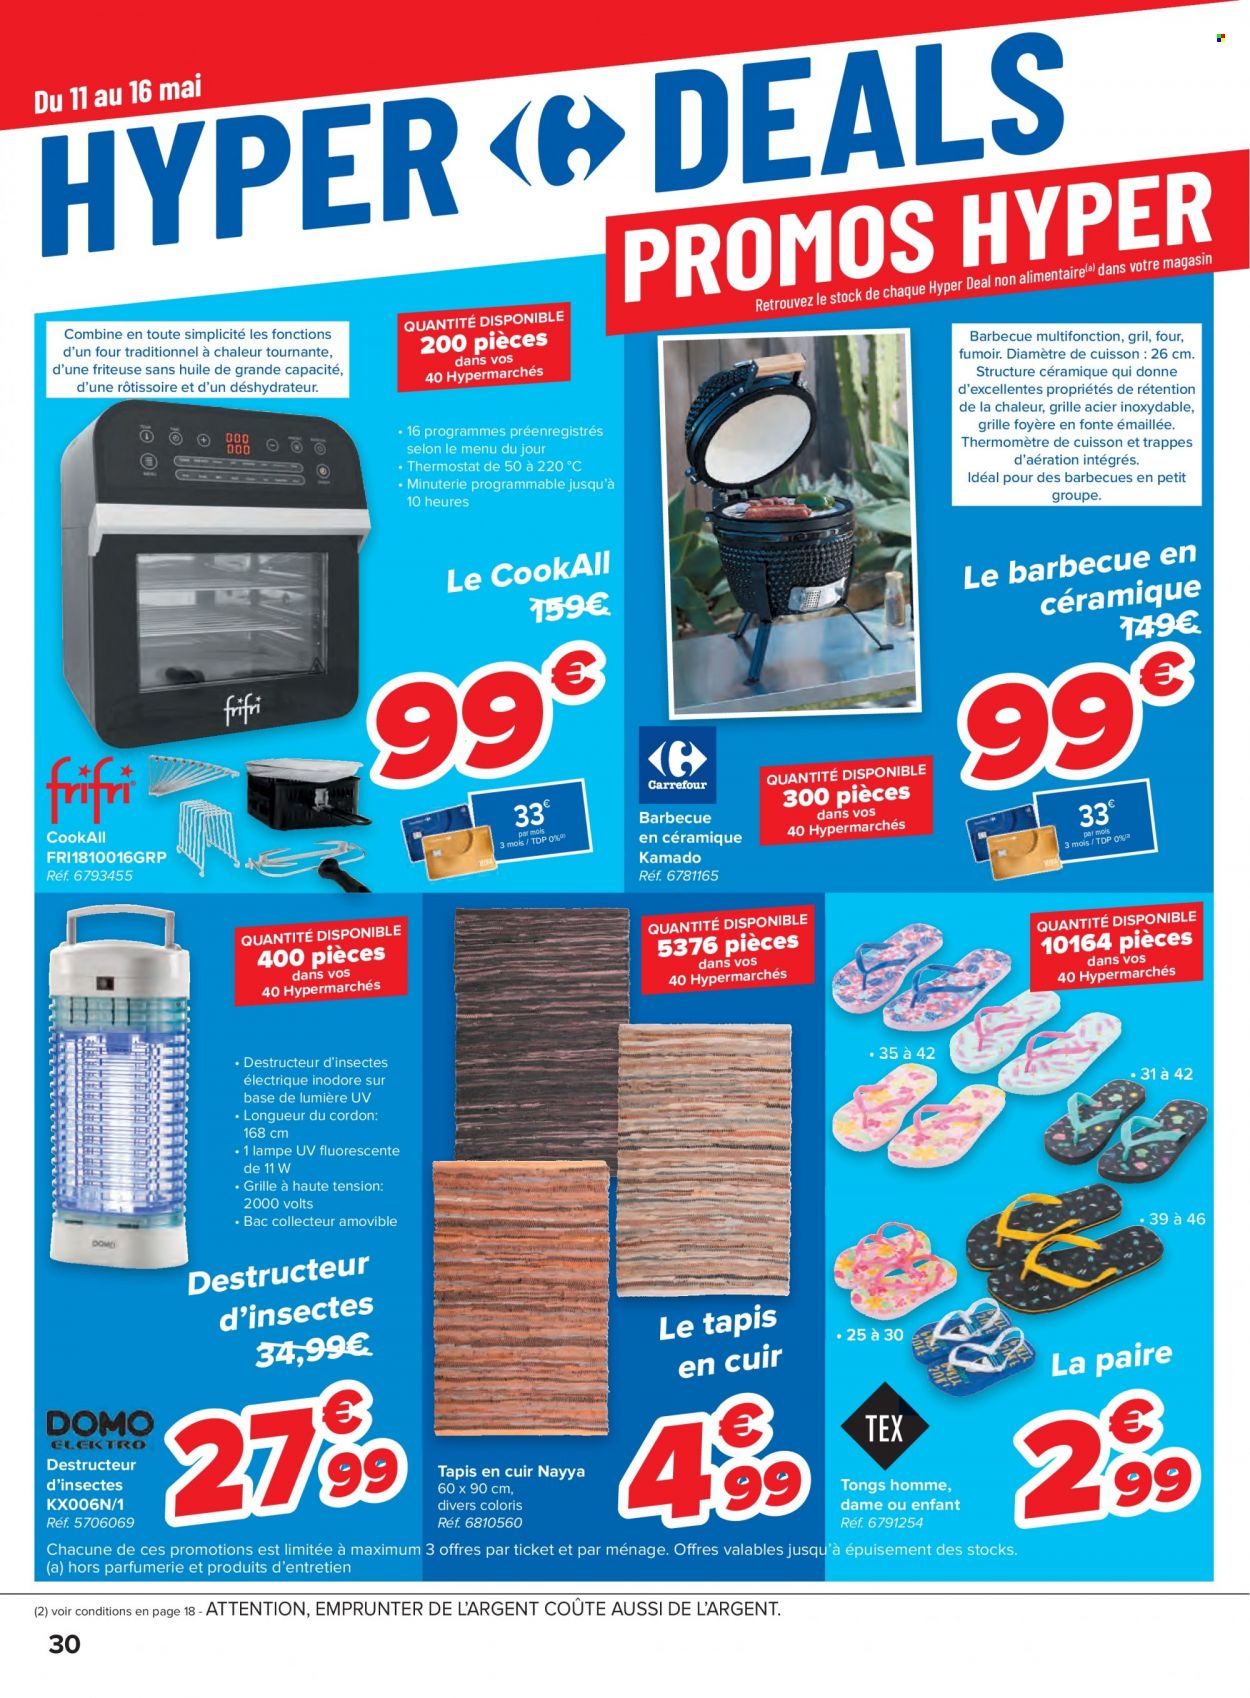 Catalogue Carrefour hypermarkt - 11.5.2022 - 23.5.2022. Page 30.